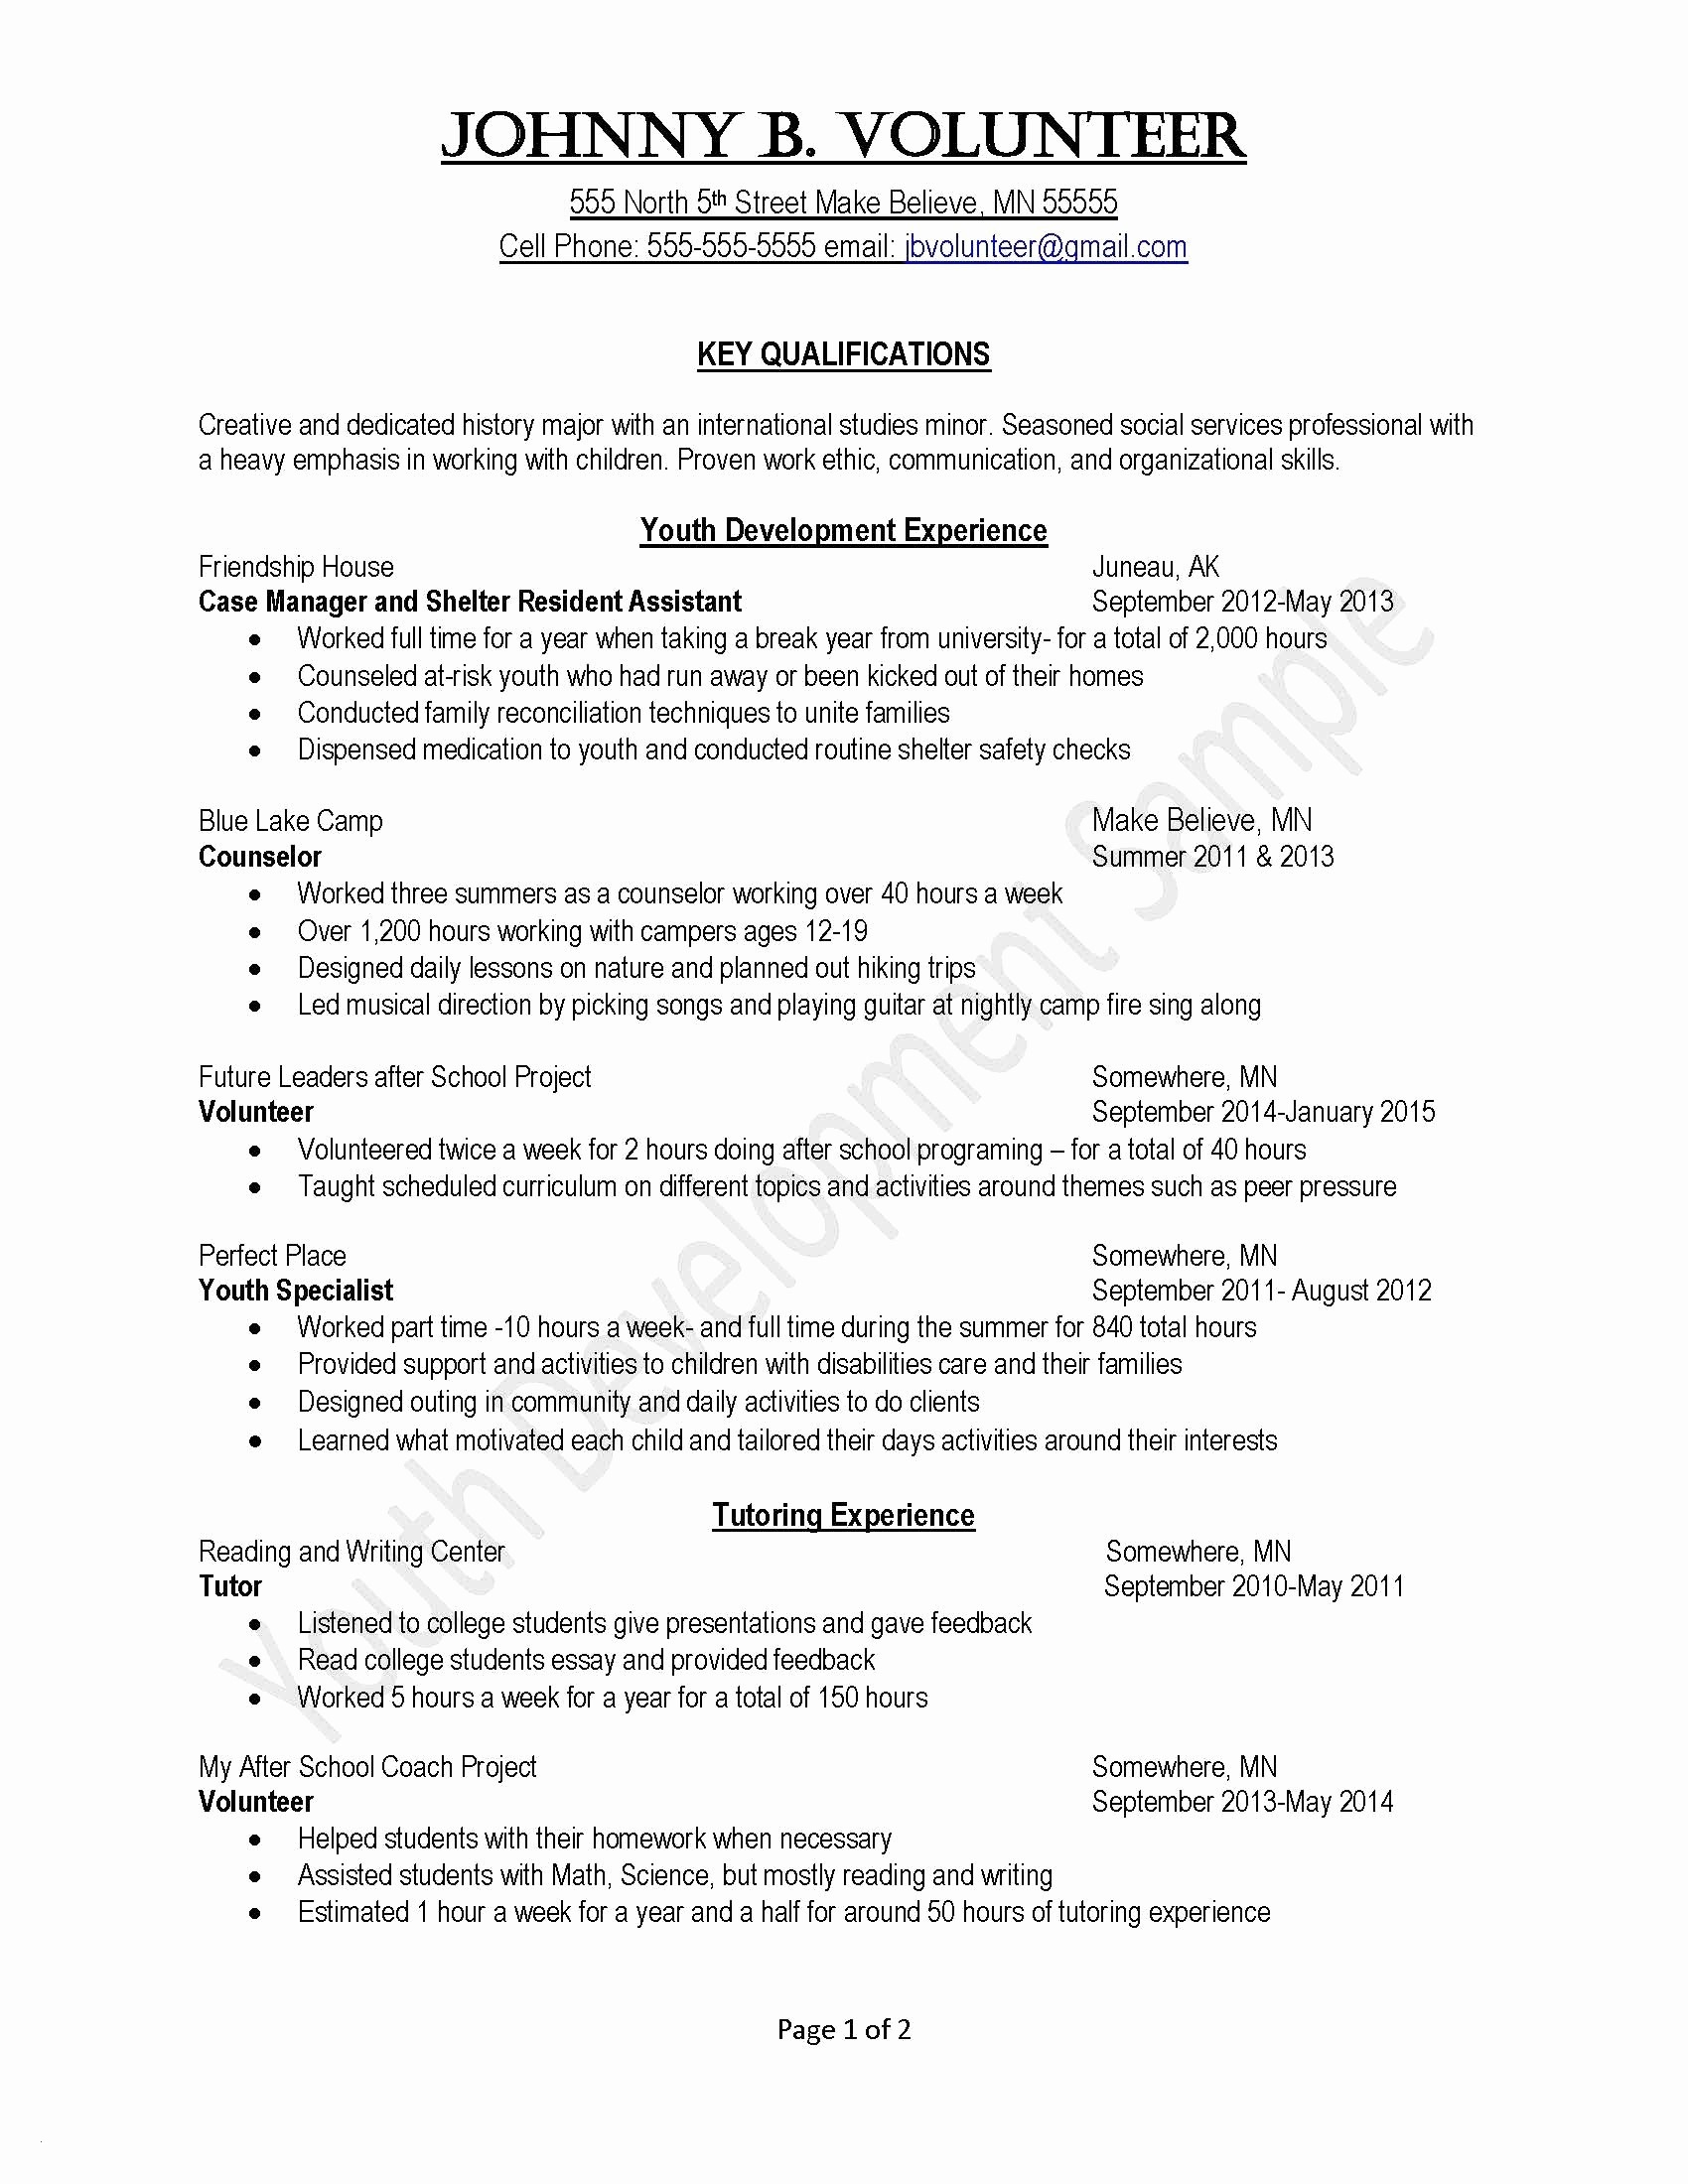 modern resume and cover letter template example-Microsoft Word 2010 Resume Template Lovely Resume Templates Word 2013 Cover Letter Template Modern Copy Od 12-a